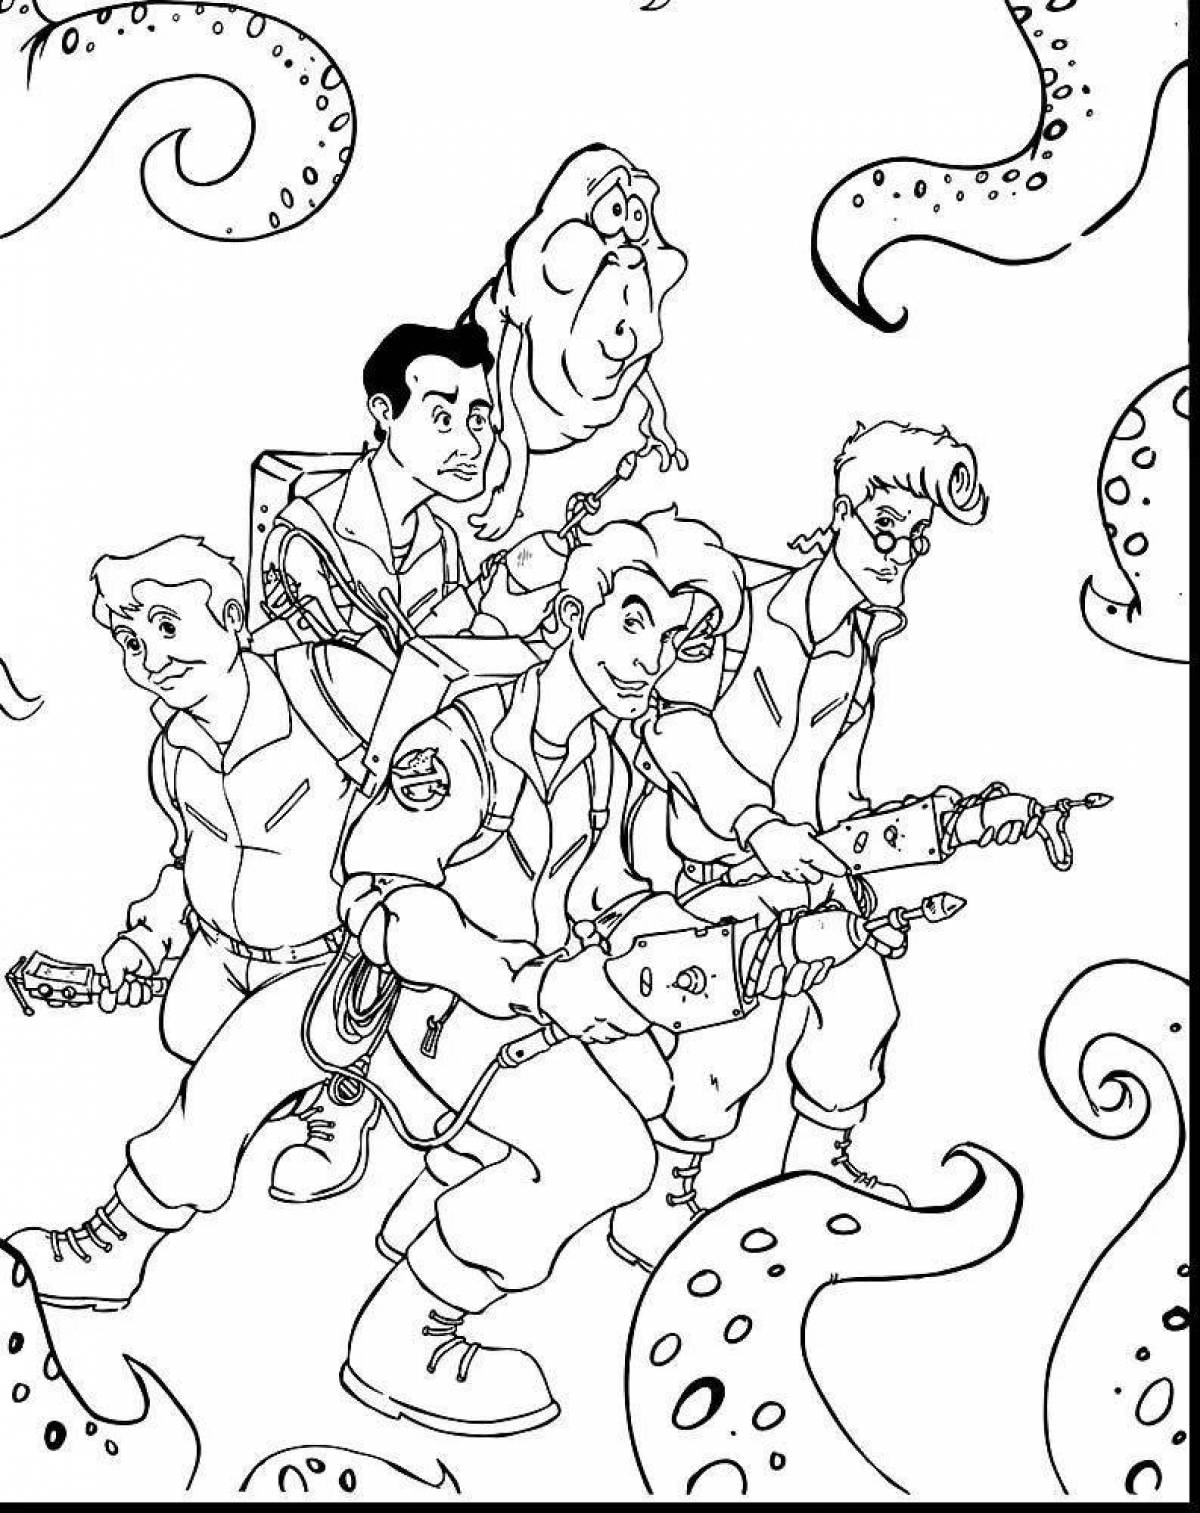 Charming ghost hunter car coloring page